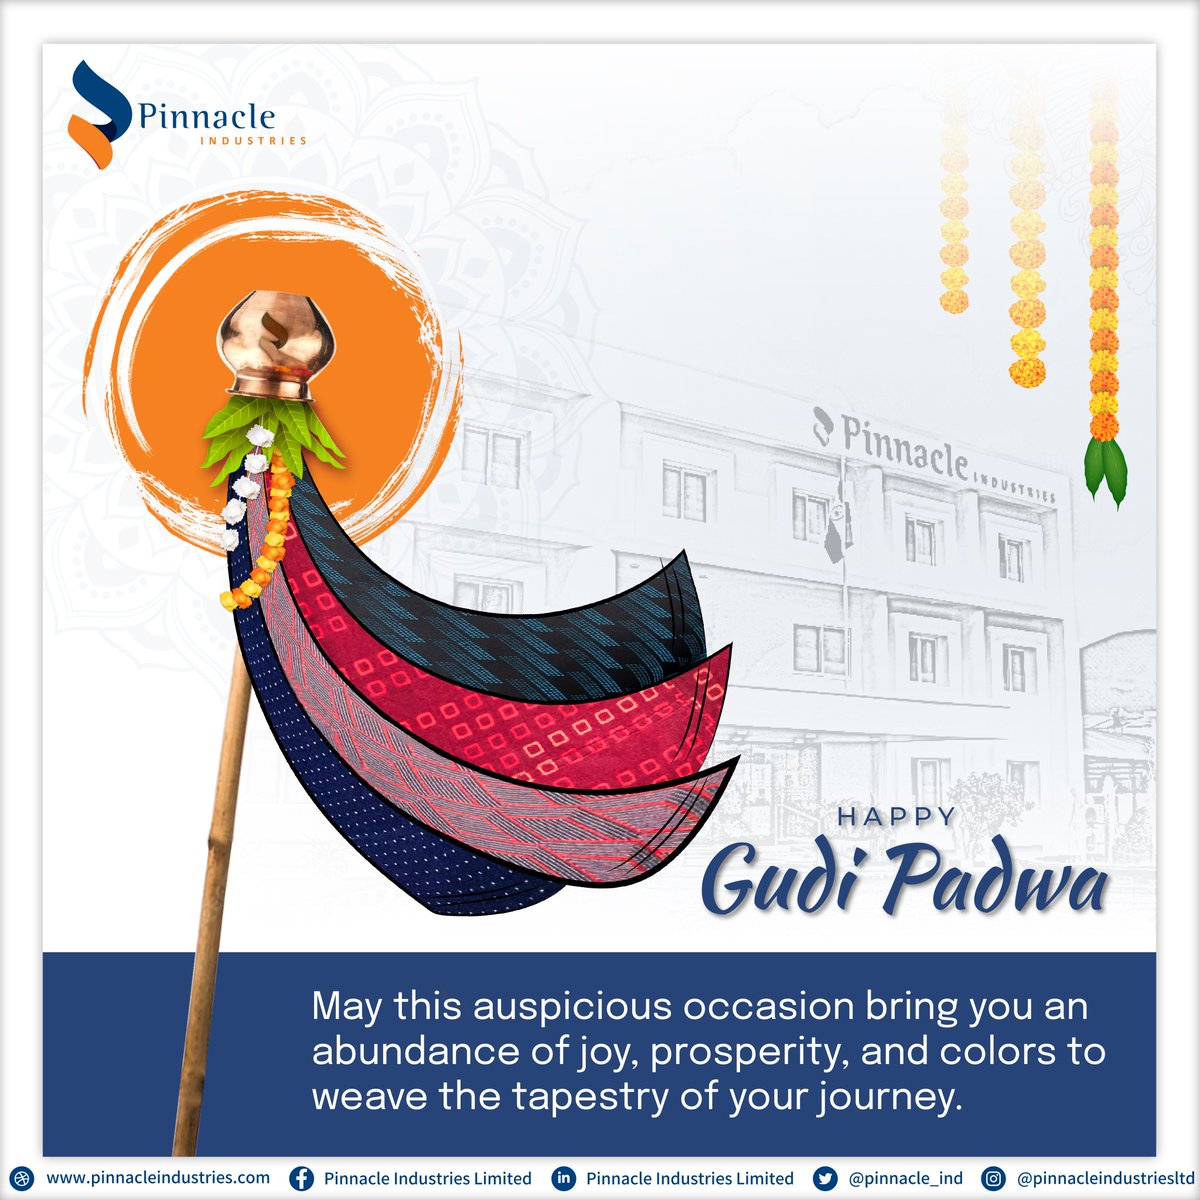 Wishing everyone a Happy Gudi Padwa from all of us at Pinnacle Industries!

#Happygudipadwa #GudiPadwa #pinnacleindustries #pinnacle #seatingsolution #vehicleseating #commercialvehicle